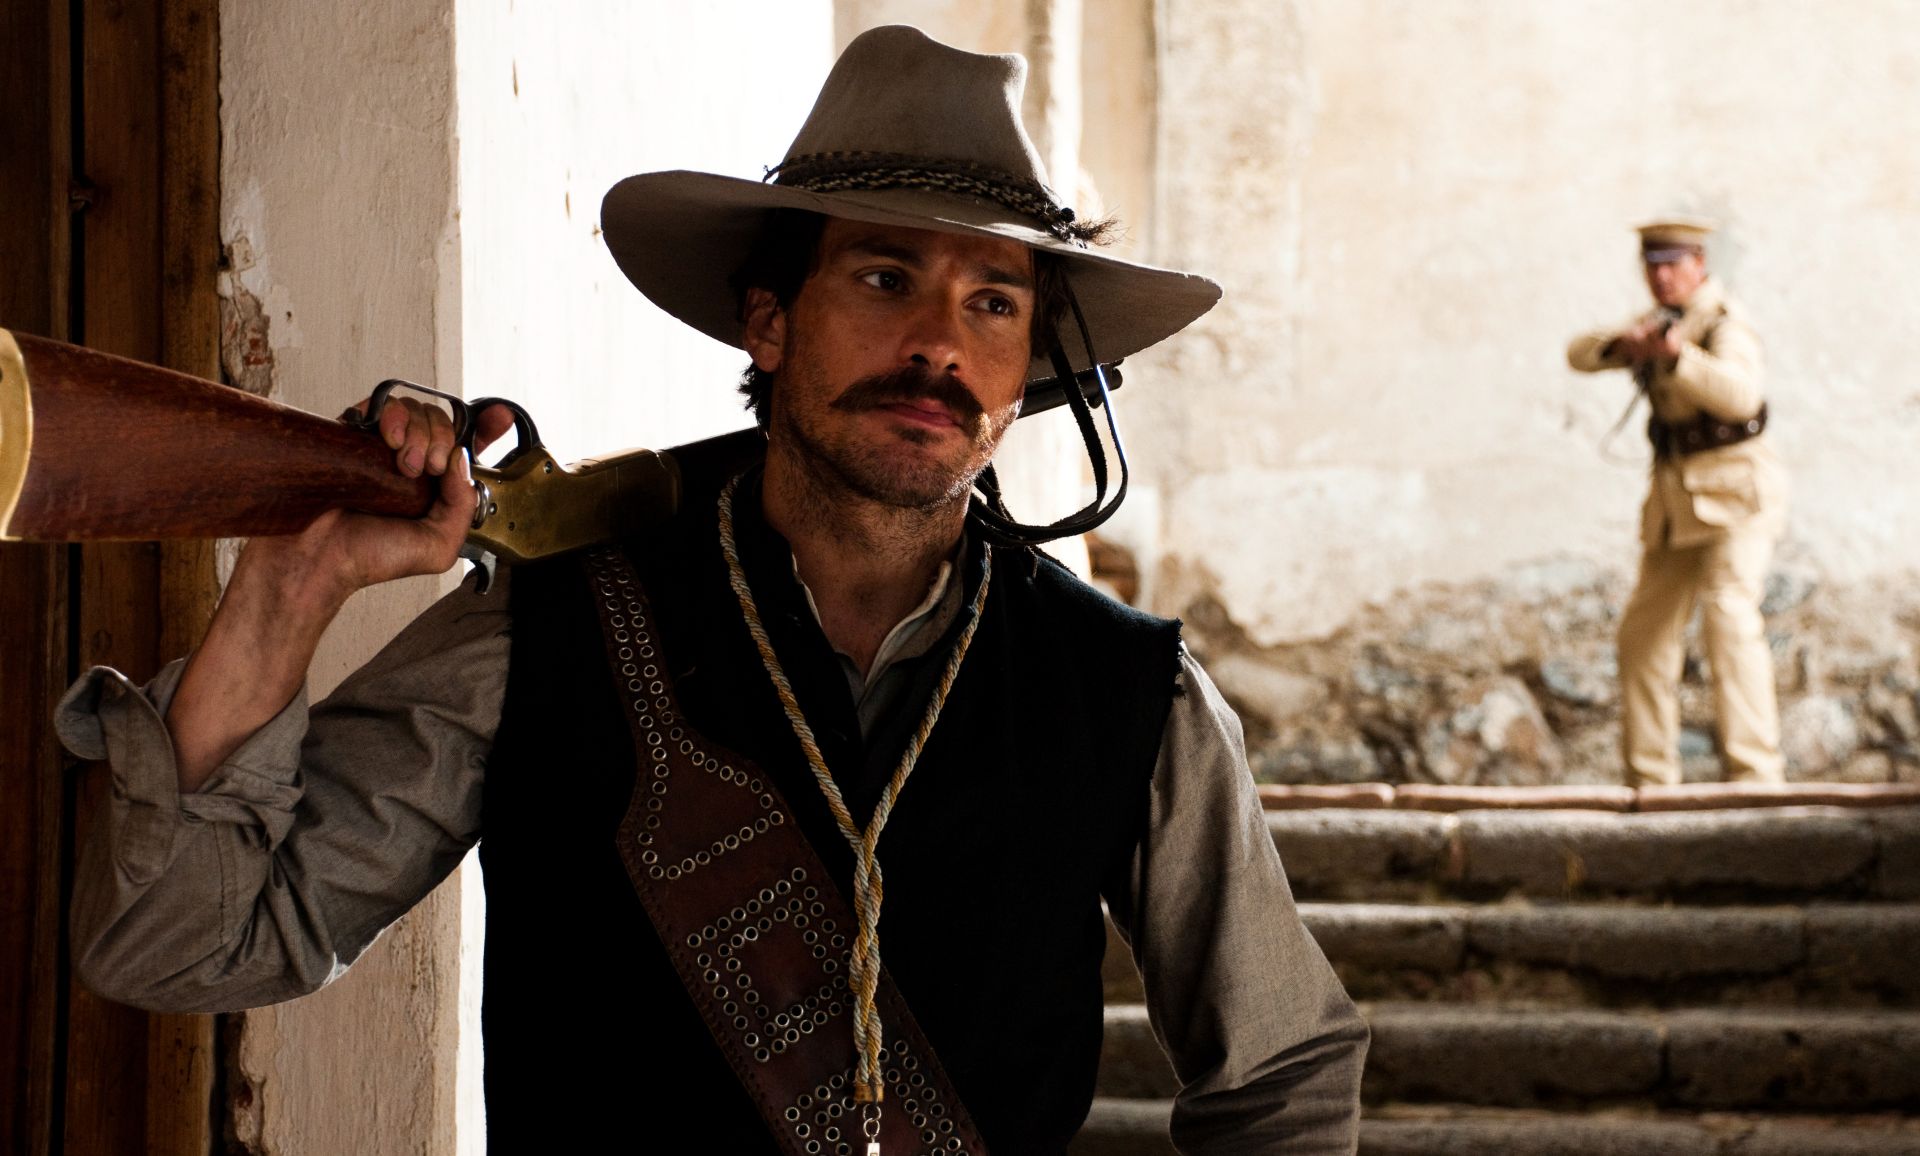 Santiago Cabrera stars as Father Vega in ARC Entertainment's For Greater Glory (2012). Photo credit by Hana Matsumoto.